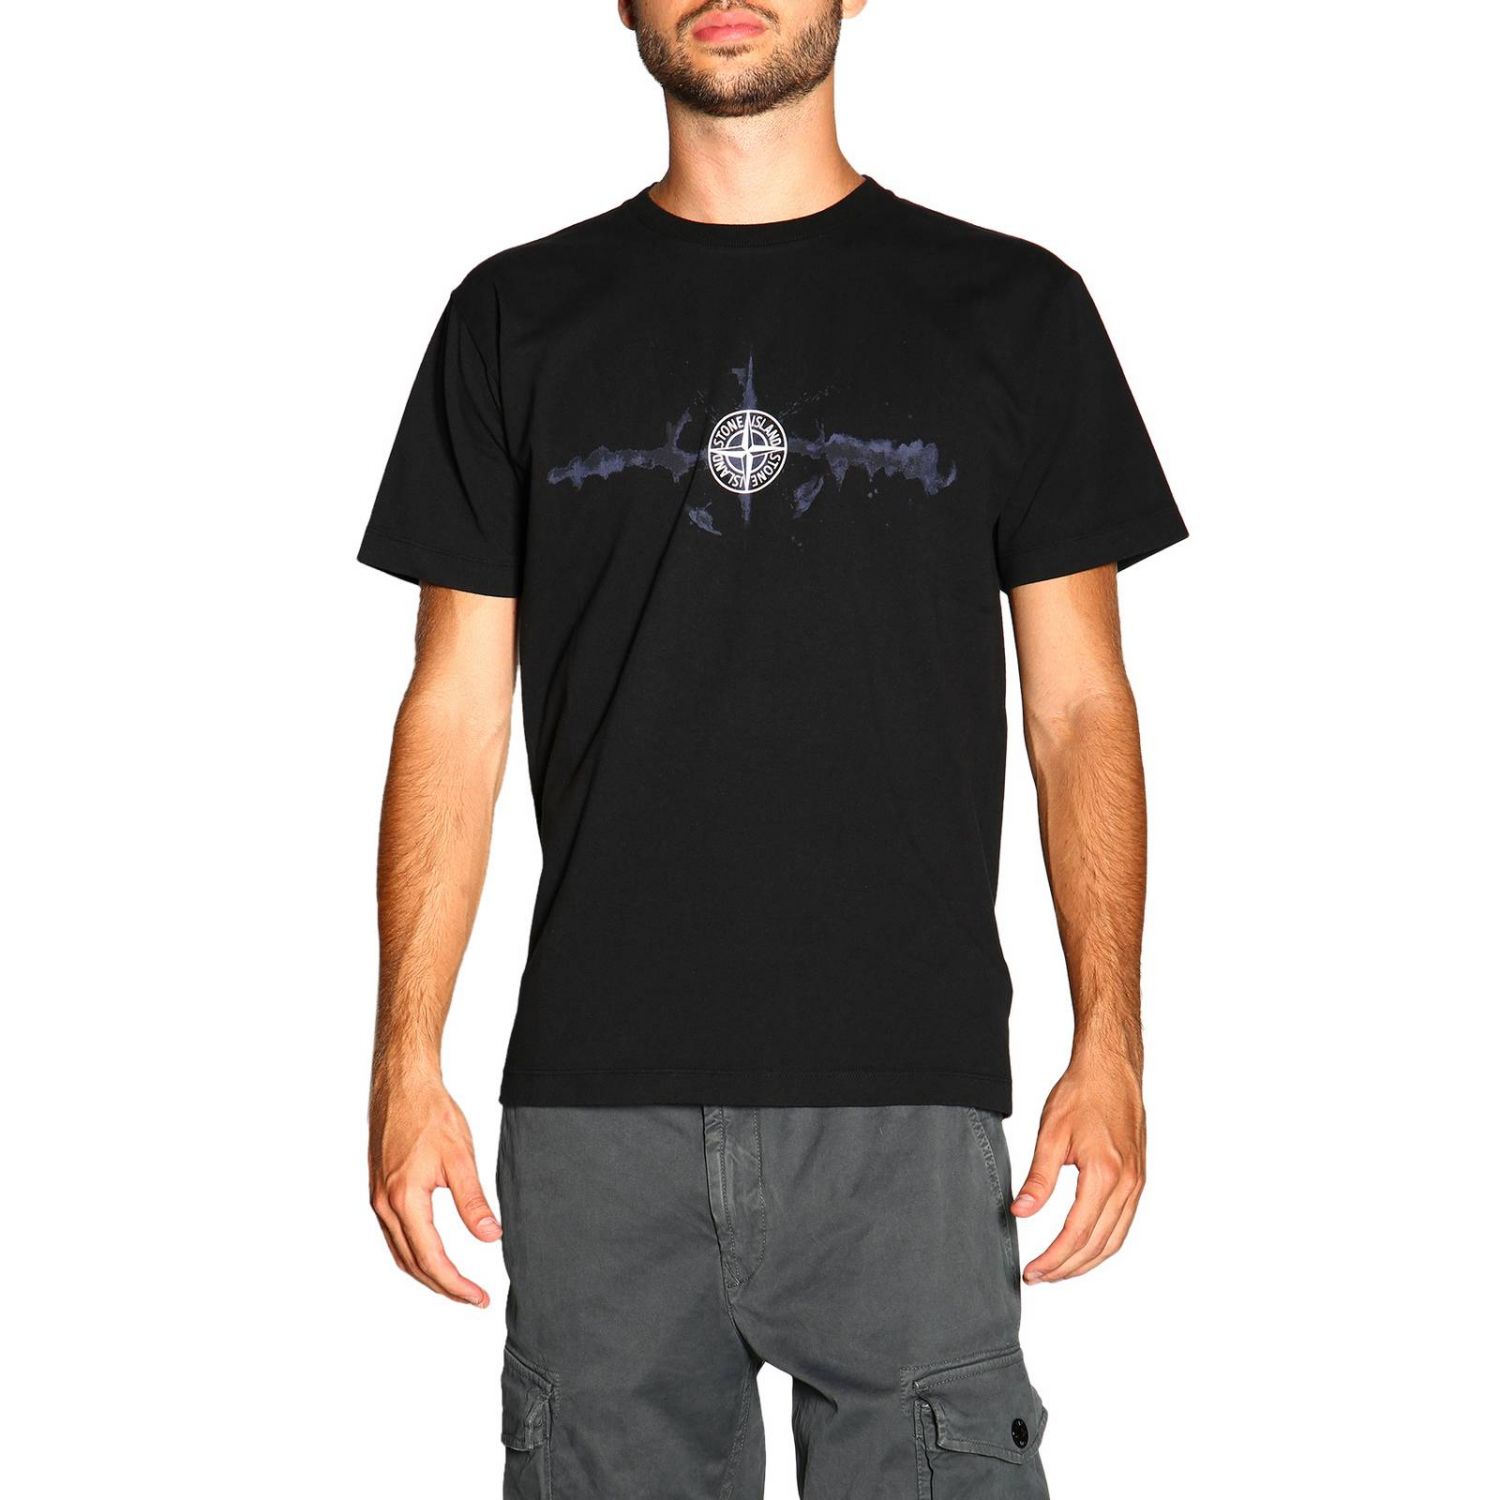 Stone Island Outlet: t-shirt for man - Black | Stone Island t-shirt ...